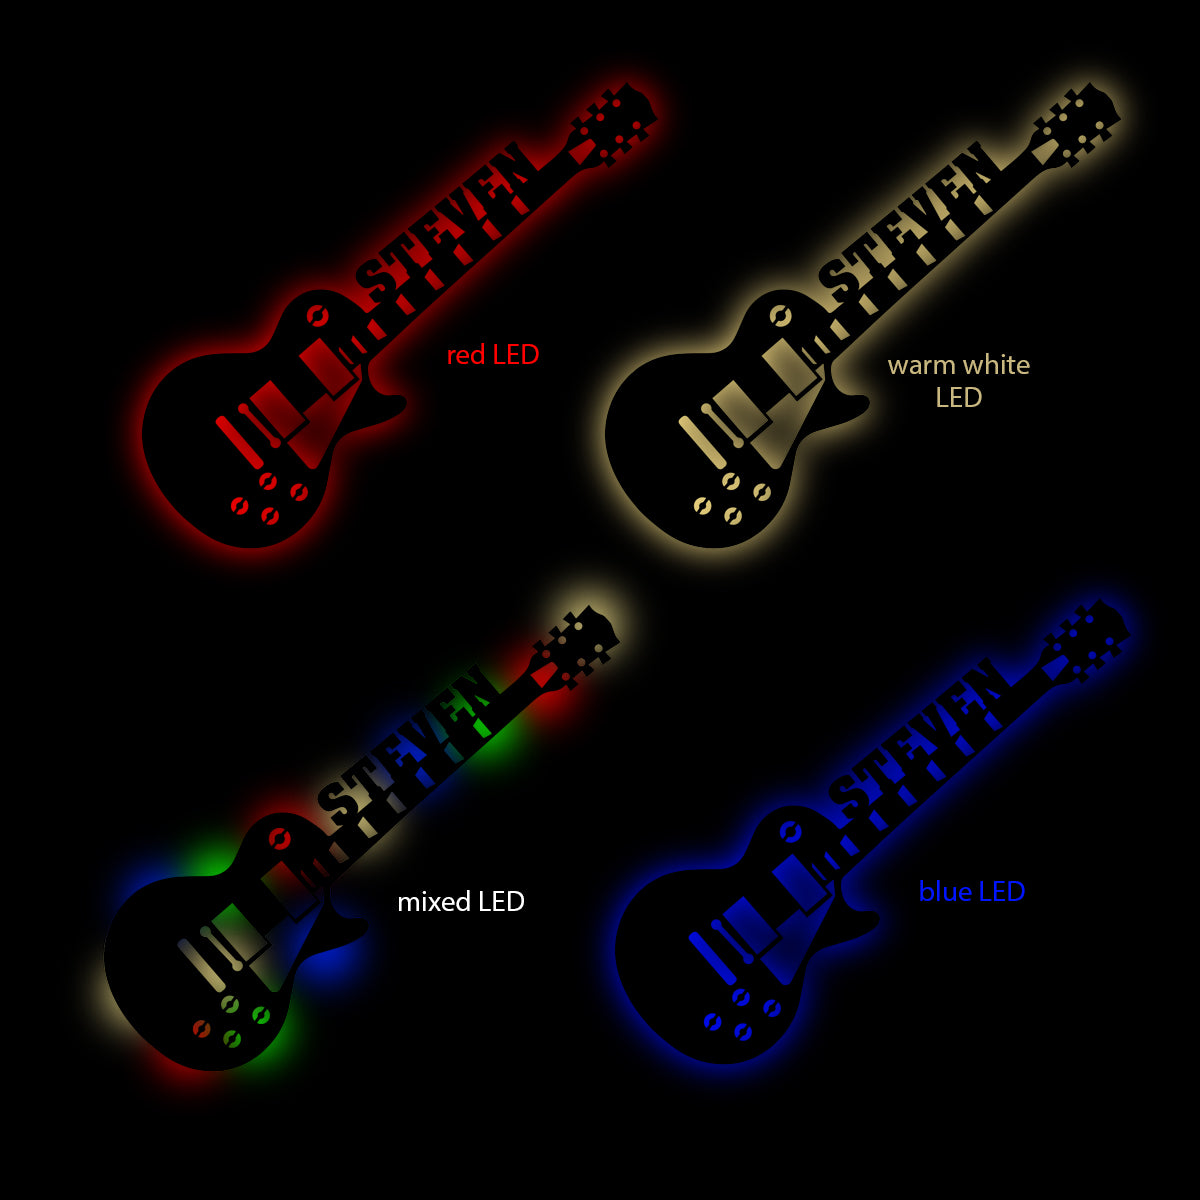 Electric Guitar - Personalized Wall Decor with optional LED Light | Starting from: